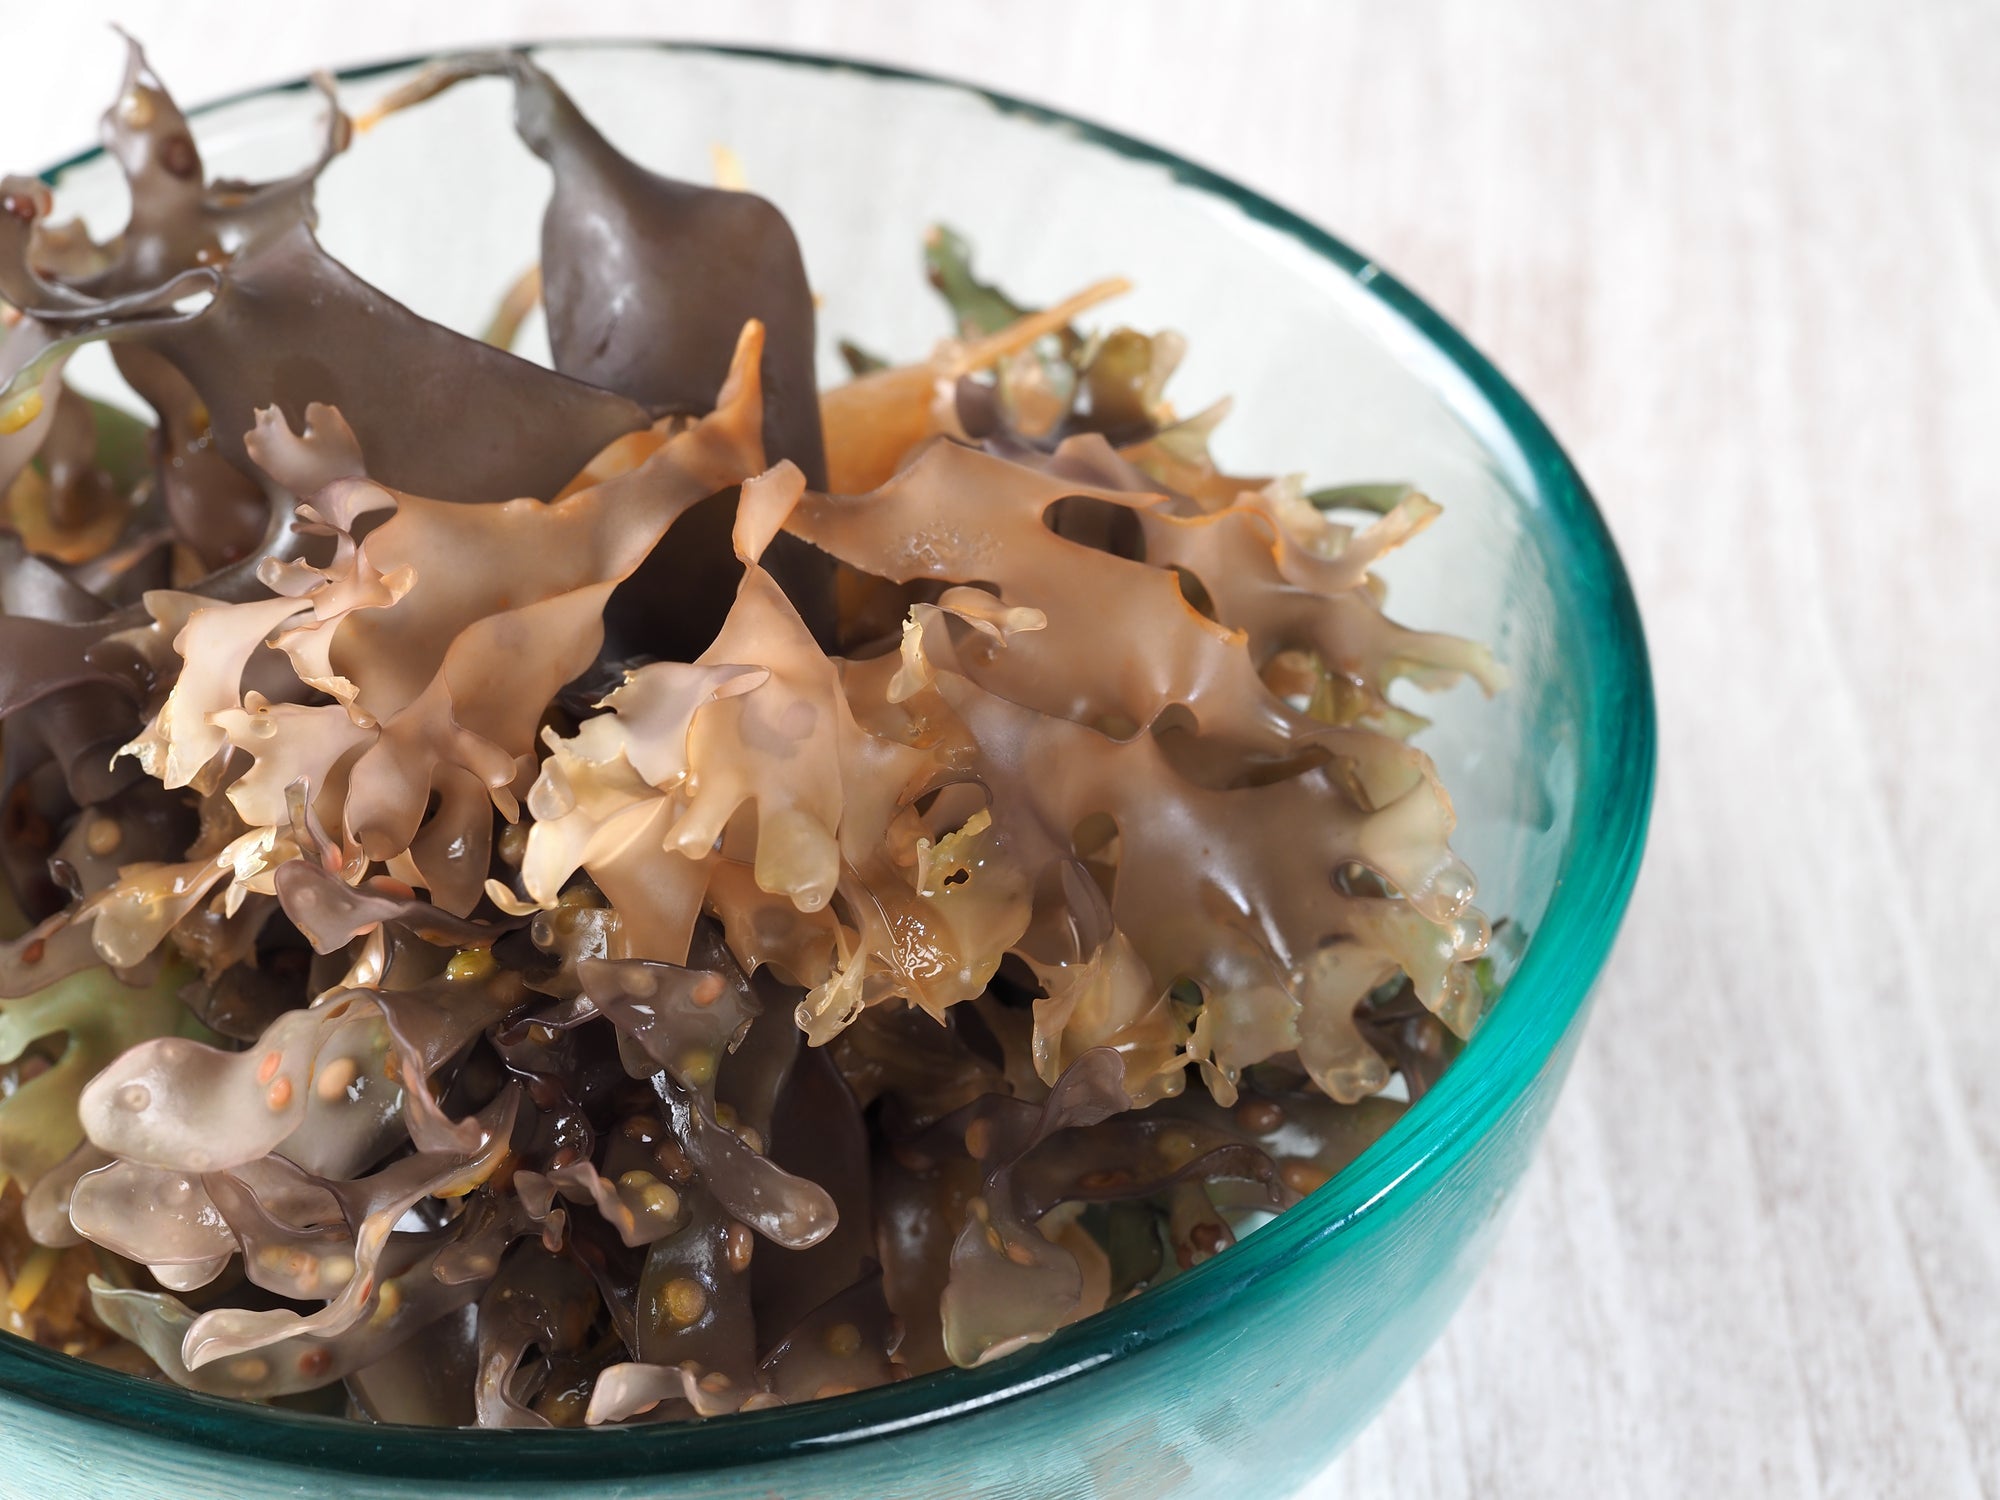 How to Use Iota Carrageenan in the Kitchen